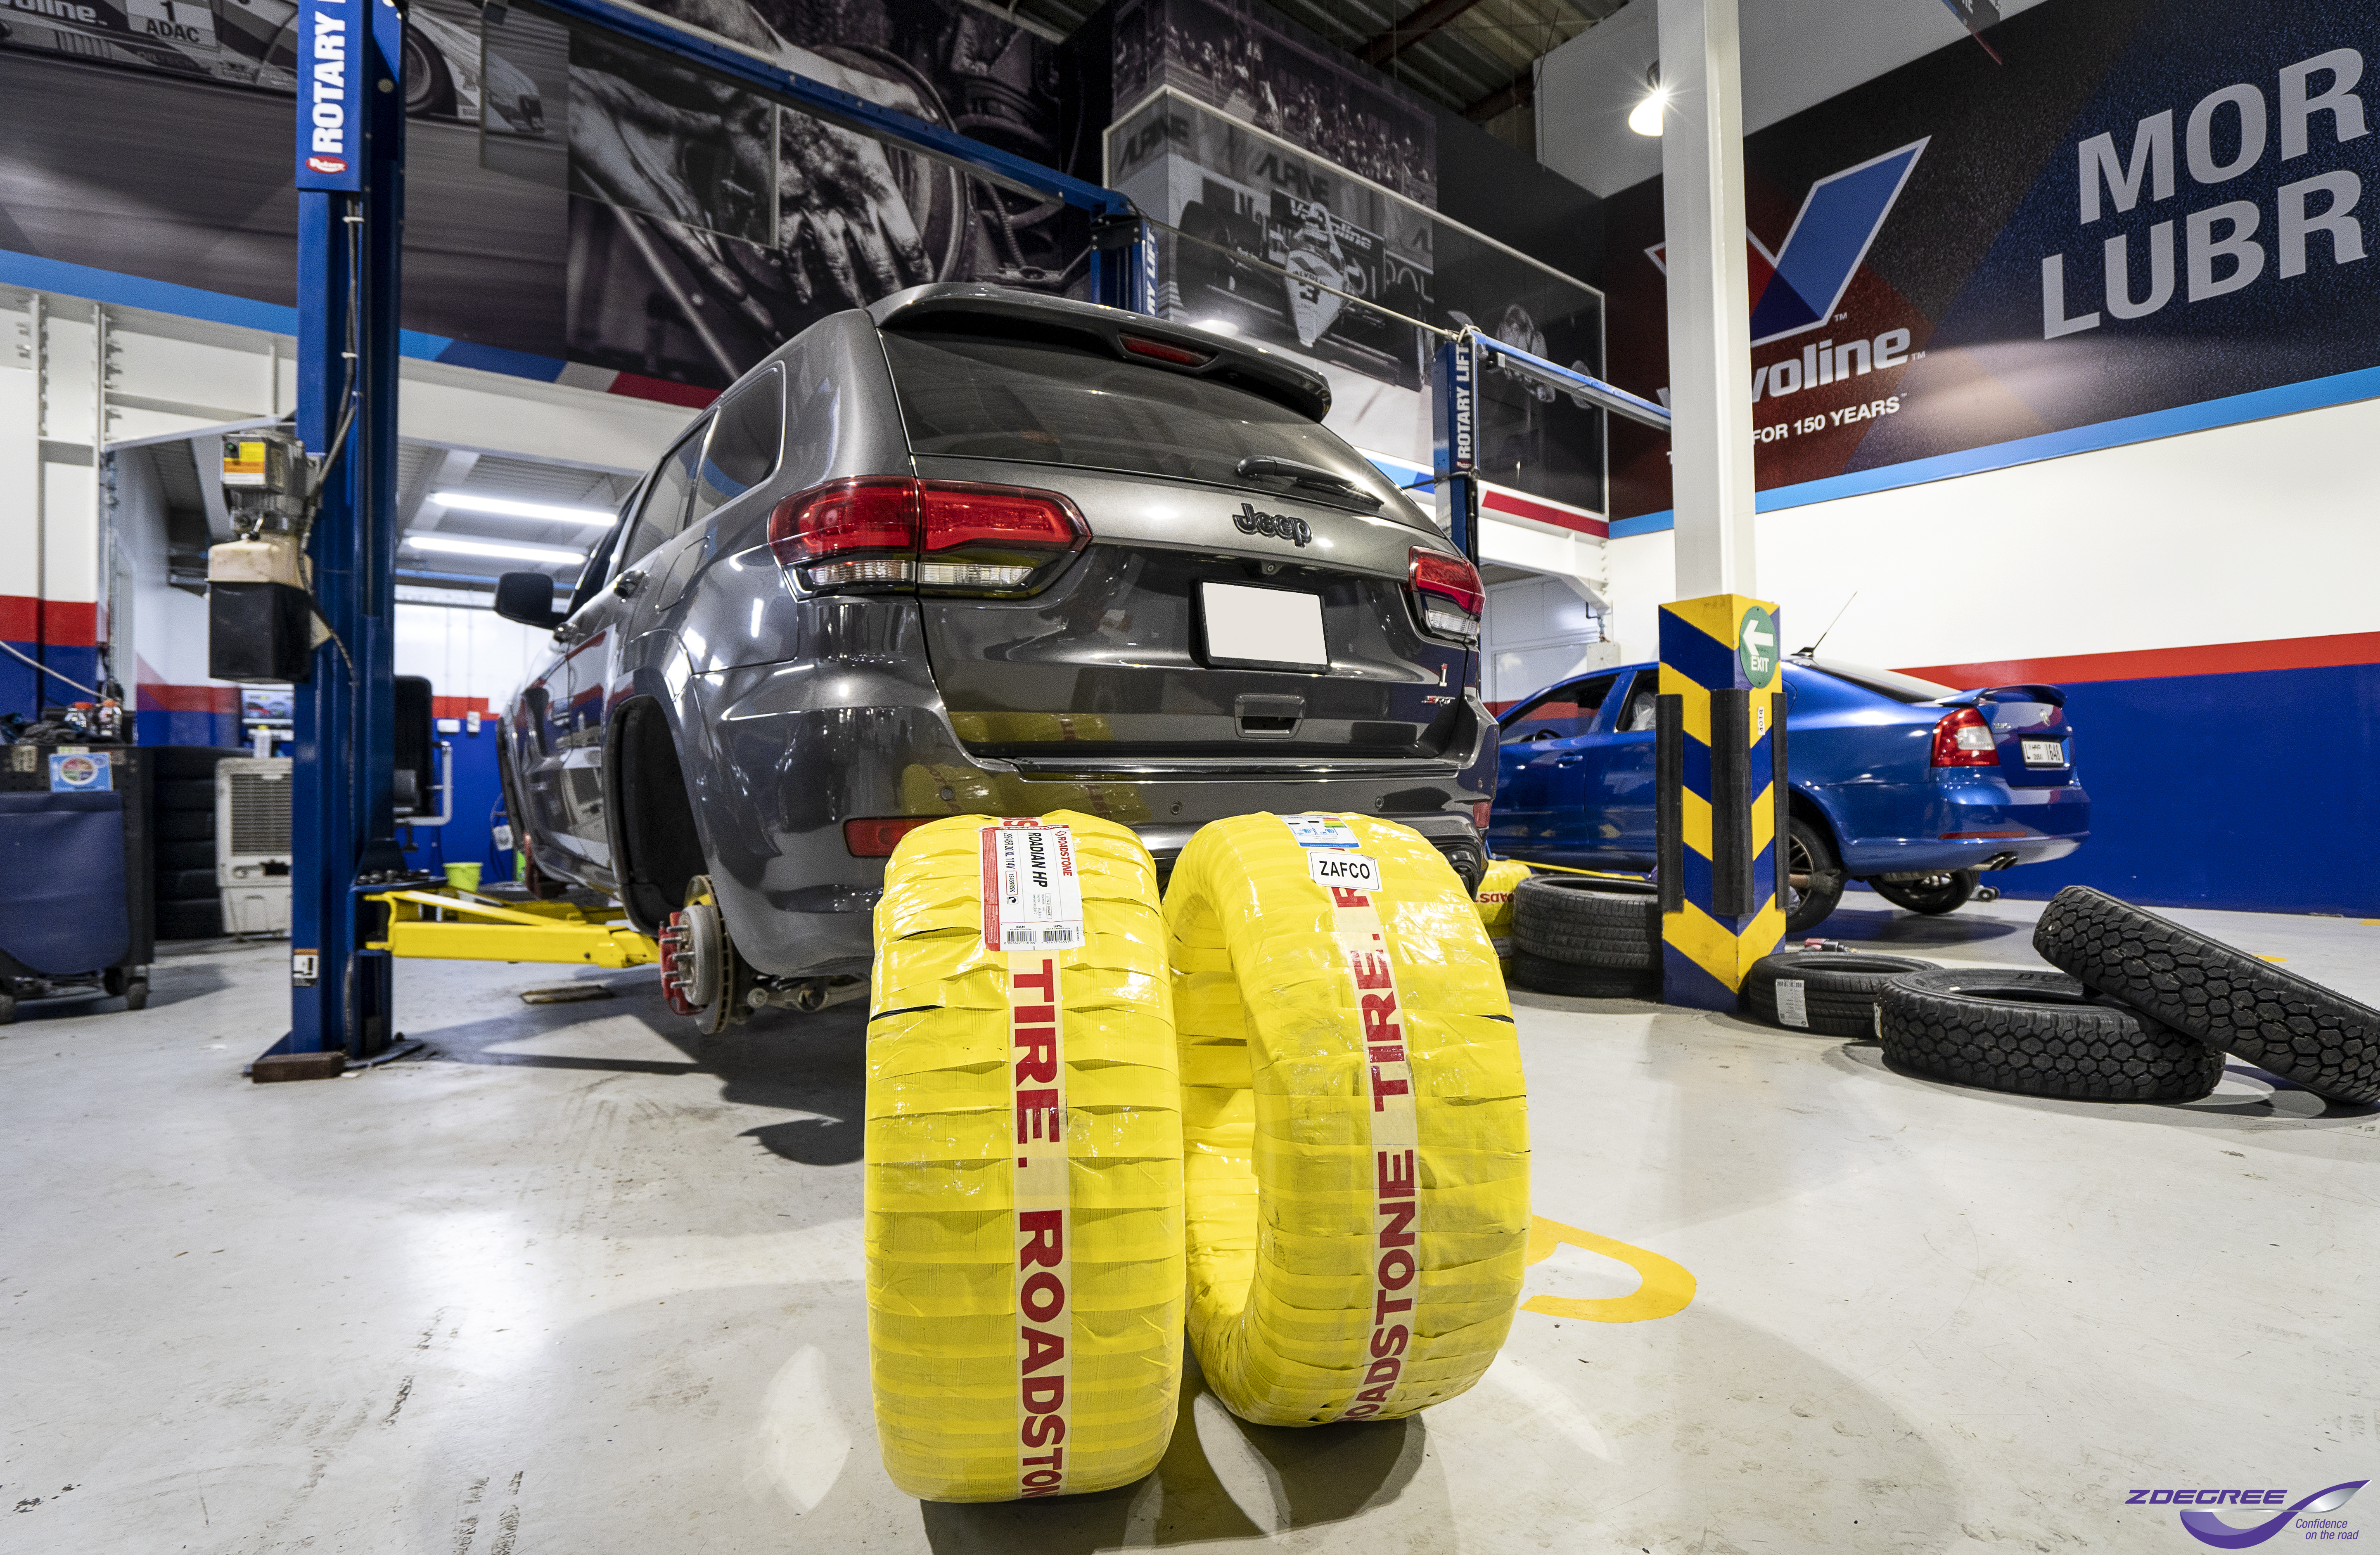 Roadstone Tyres: An A-rated UTQG tyre for the UAE weather